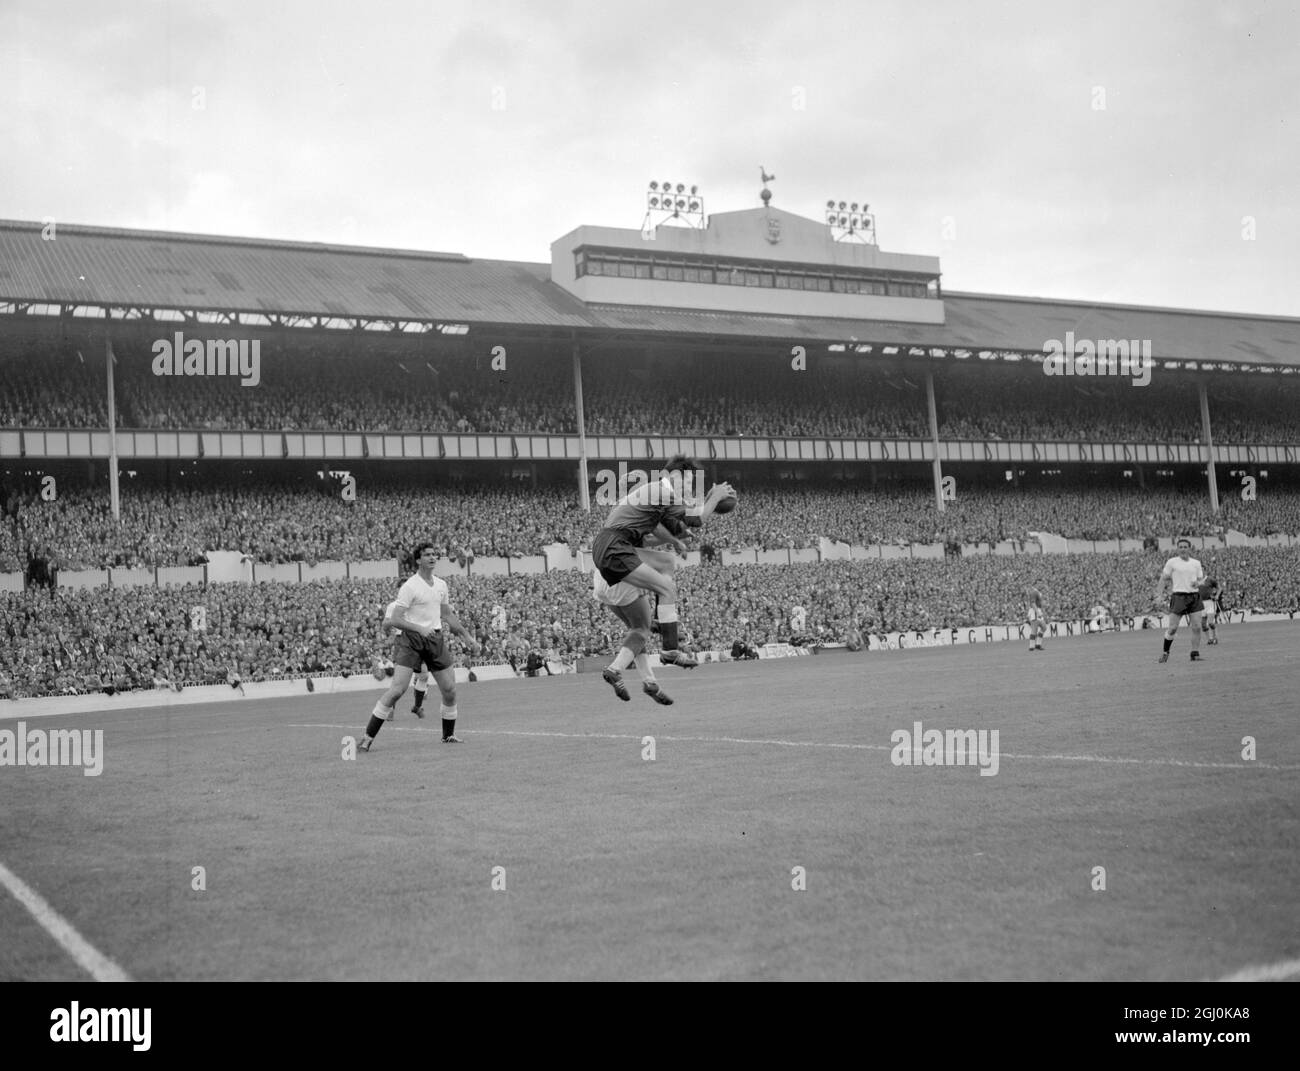 Tottenham, Middlesex: Tottenham Hotspurs' Goal keeper Brown (forground) Grabs the ball despite being heavily pressed by Everton Centre - Forward Harris at Spurs' home ground here today -- First Day of the football season. 20 August 1960 Stock Photo